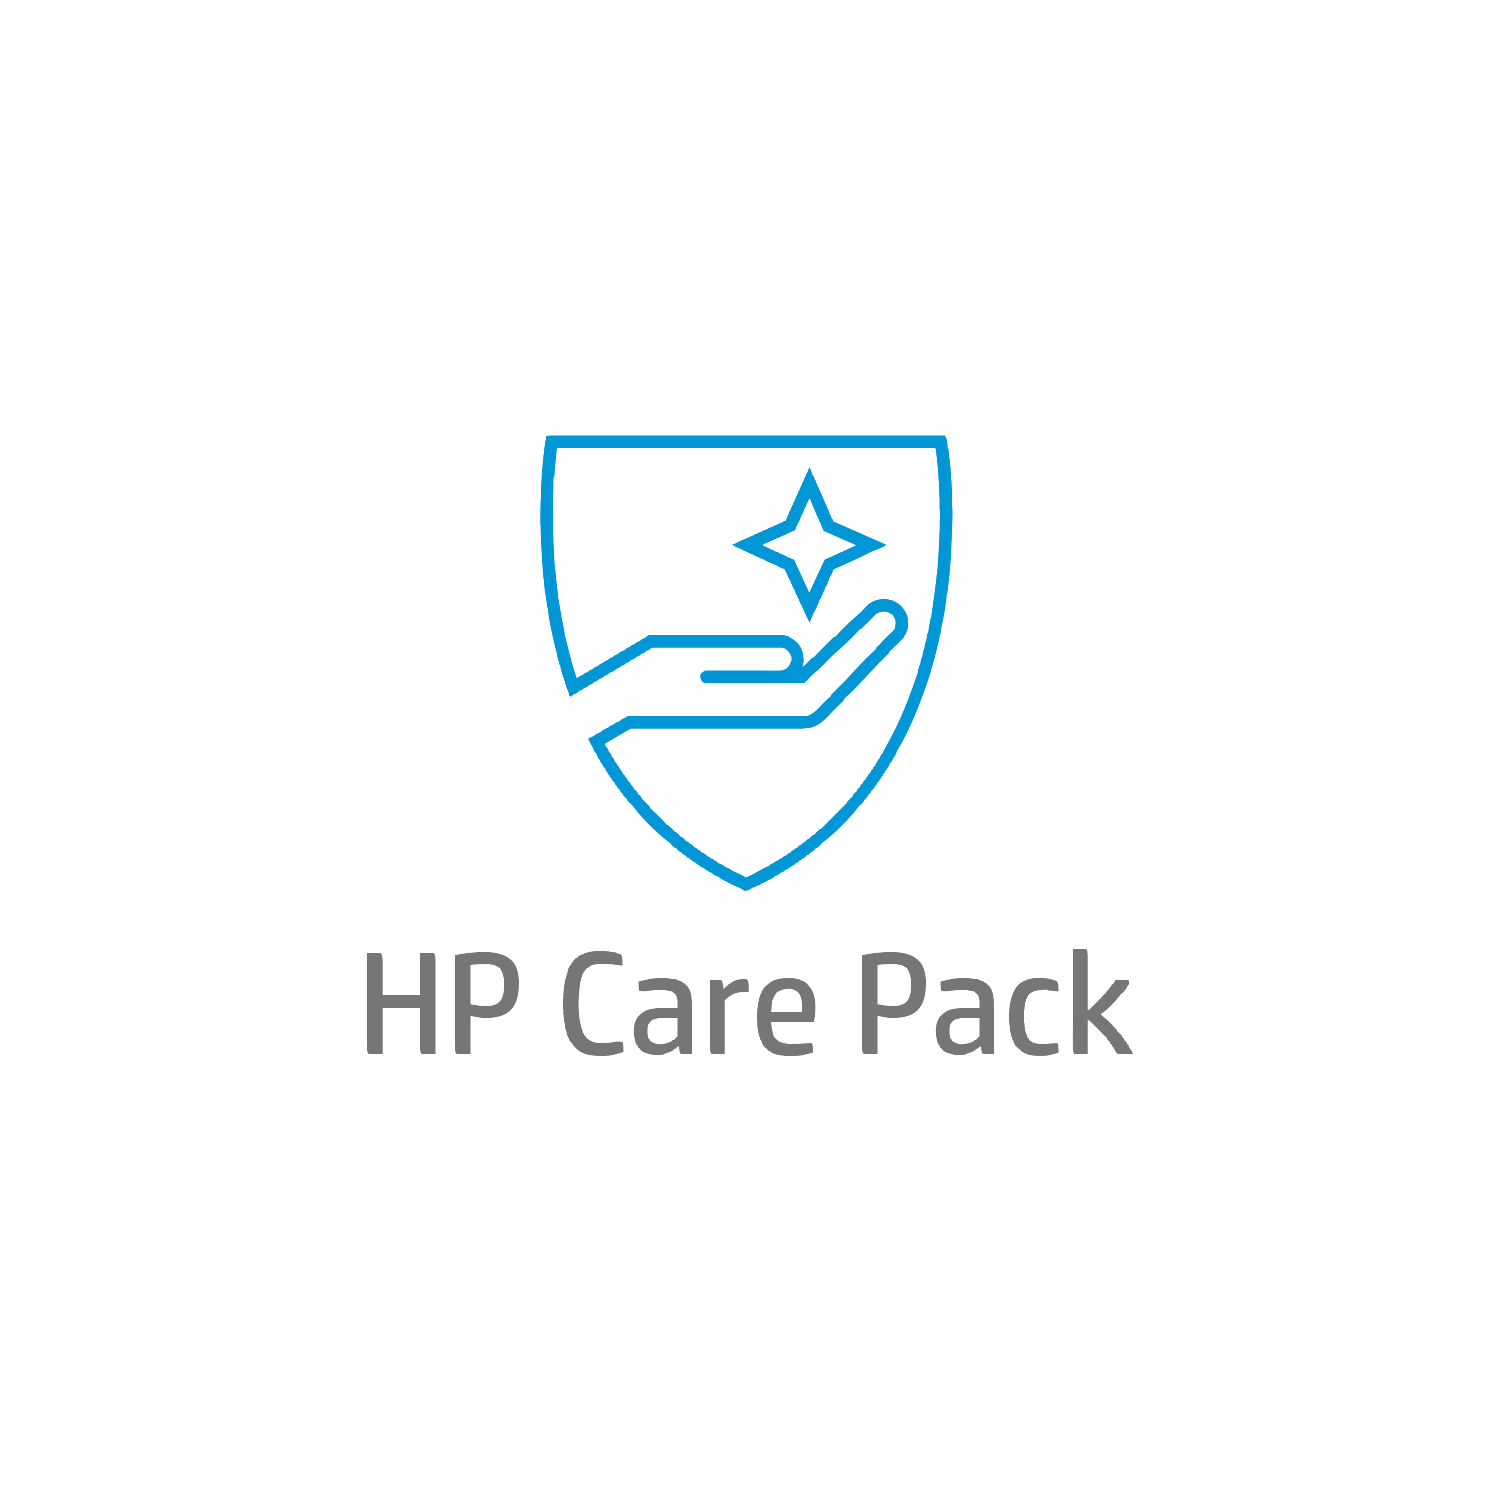 Bild von HP Care Pack Electronic HP Care Pack Pavilion - Service & Support 3 Jahre